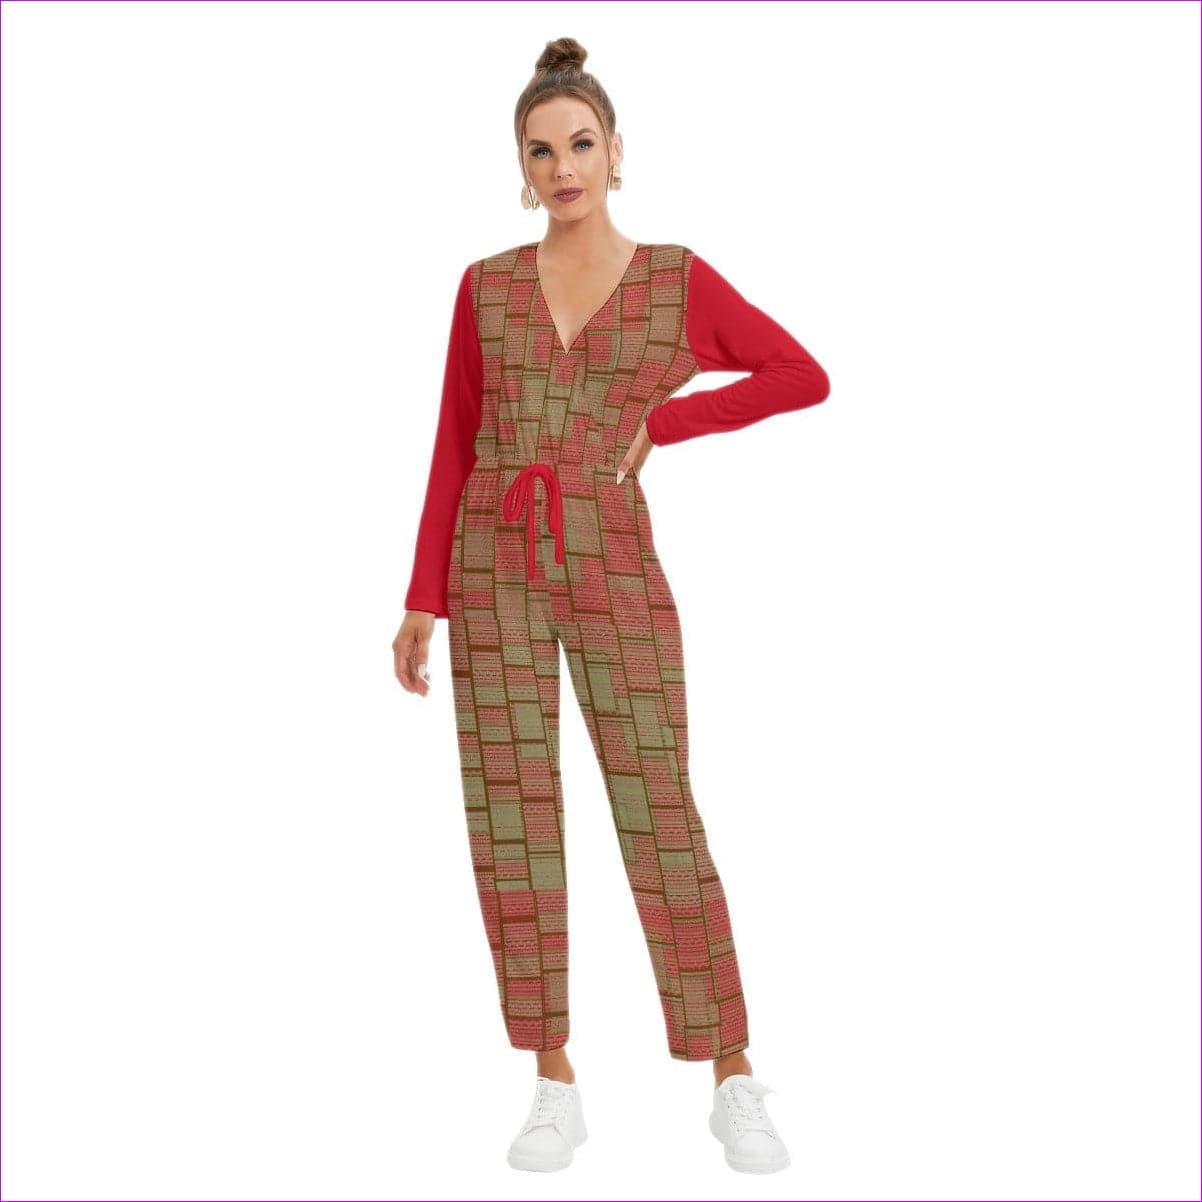 Chained 2 Womens V-neck Red Sleeve High Waist Jumpsuit - women's jumpsuit at TFC&H Co.